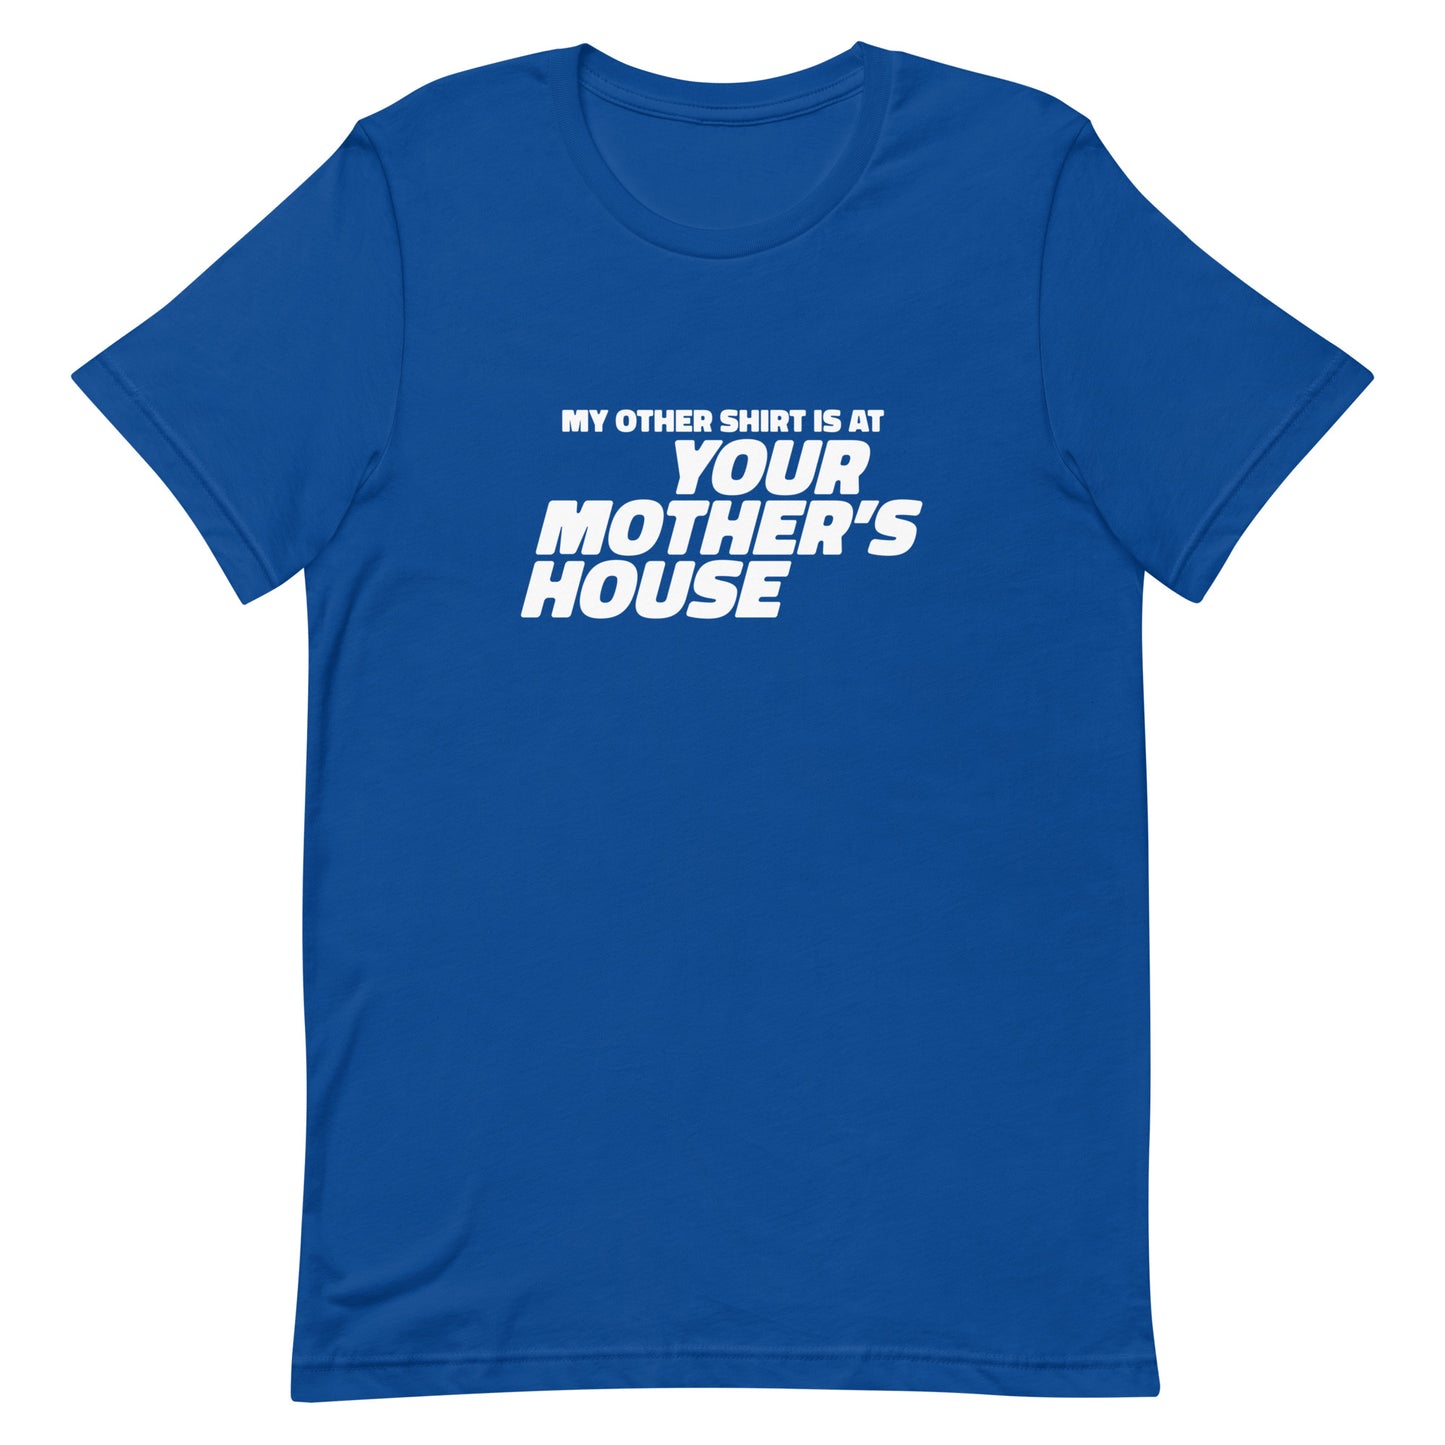 My Other Shirt is at Your Mother's House Unisex t-shirt